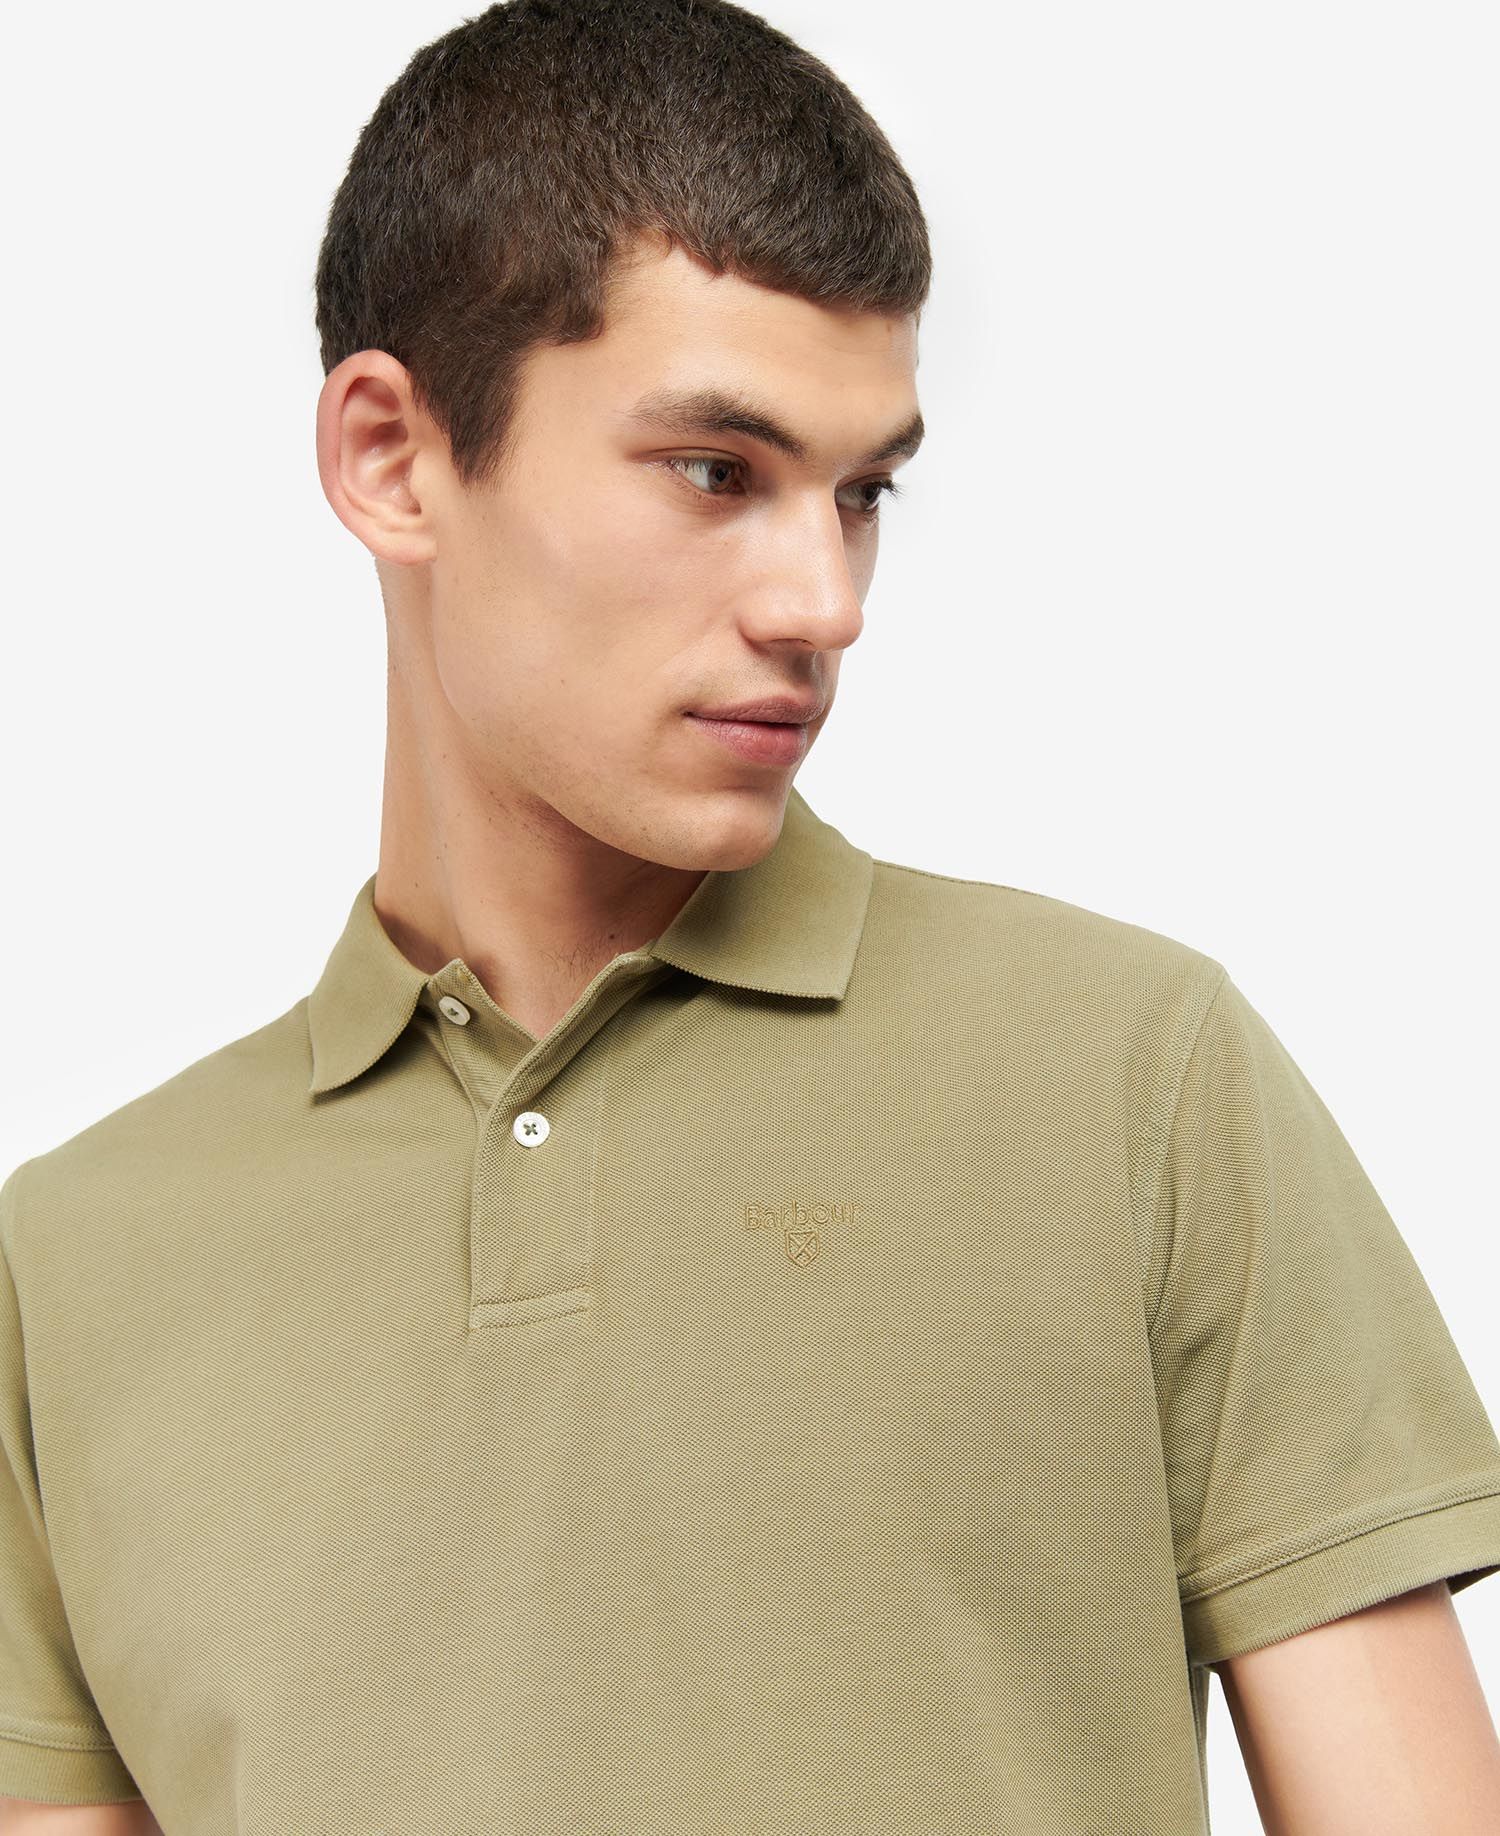 Shop the Barbour Wash Sports Polo Shirt today. | Barbour